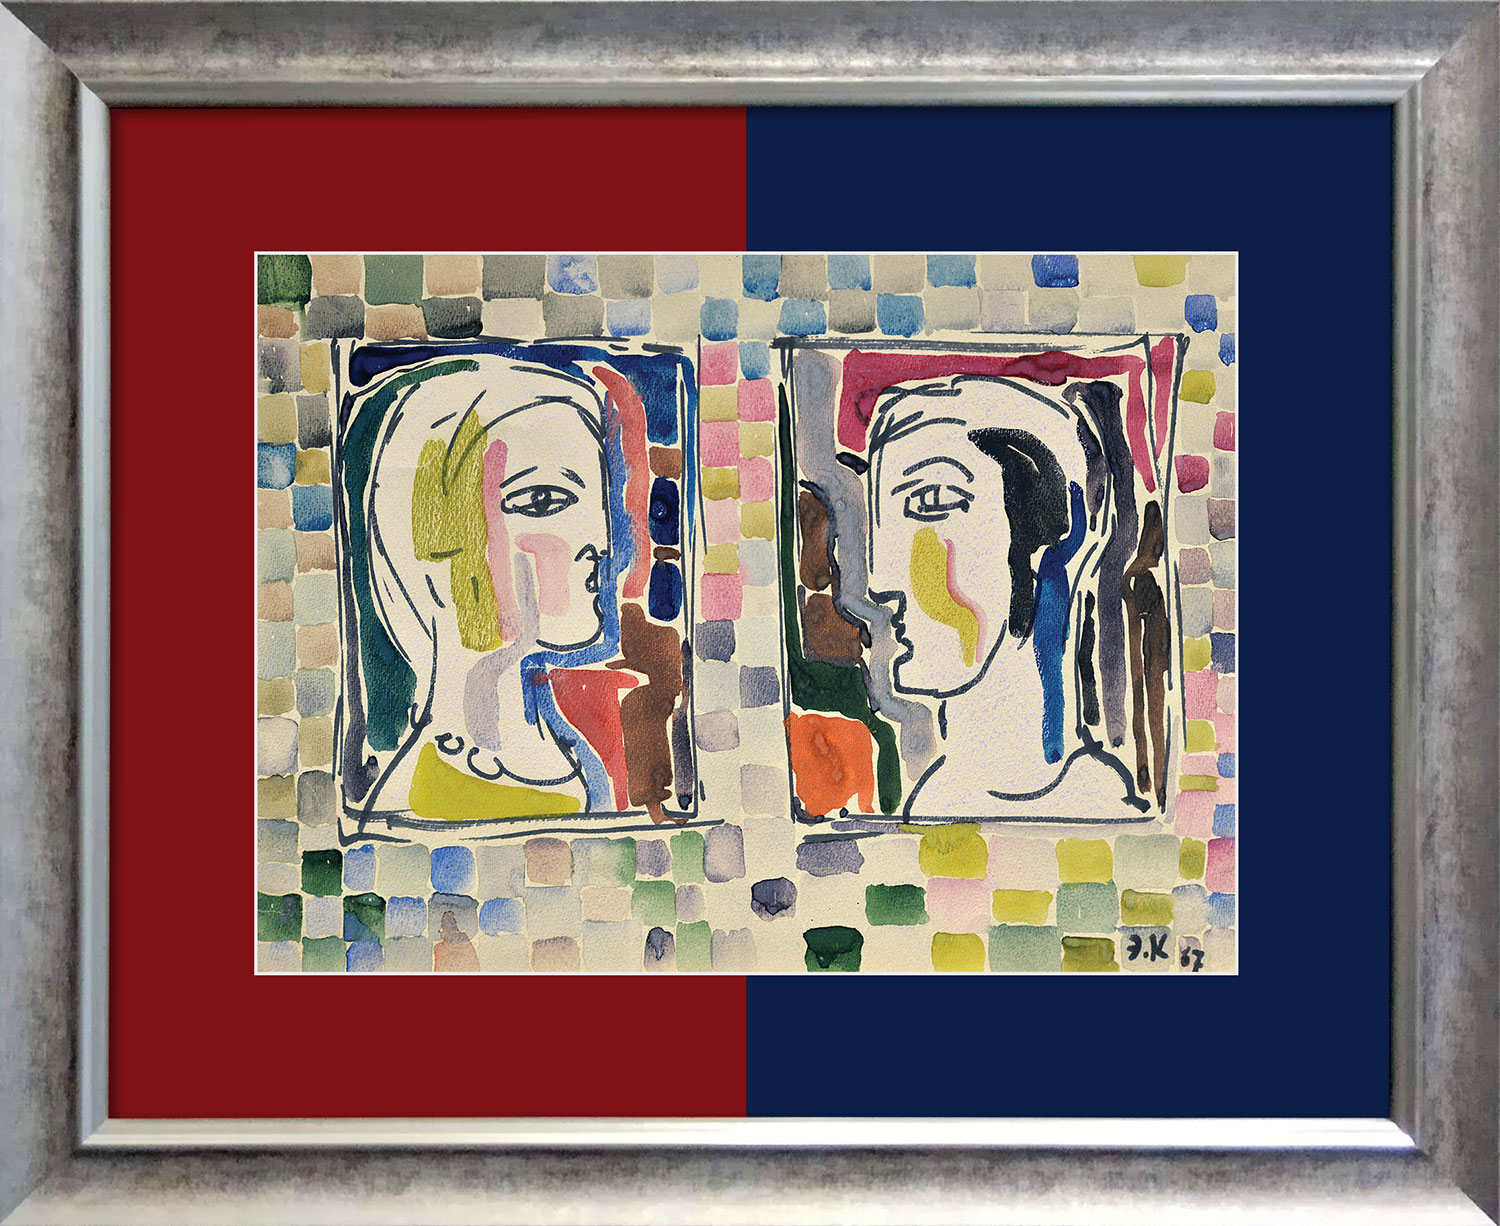 "Two", 1967 - 1